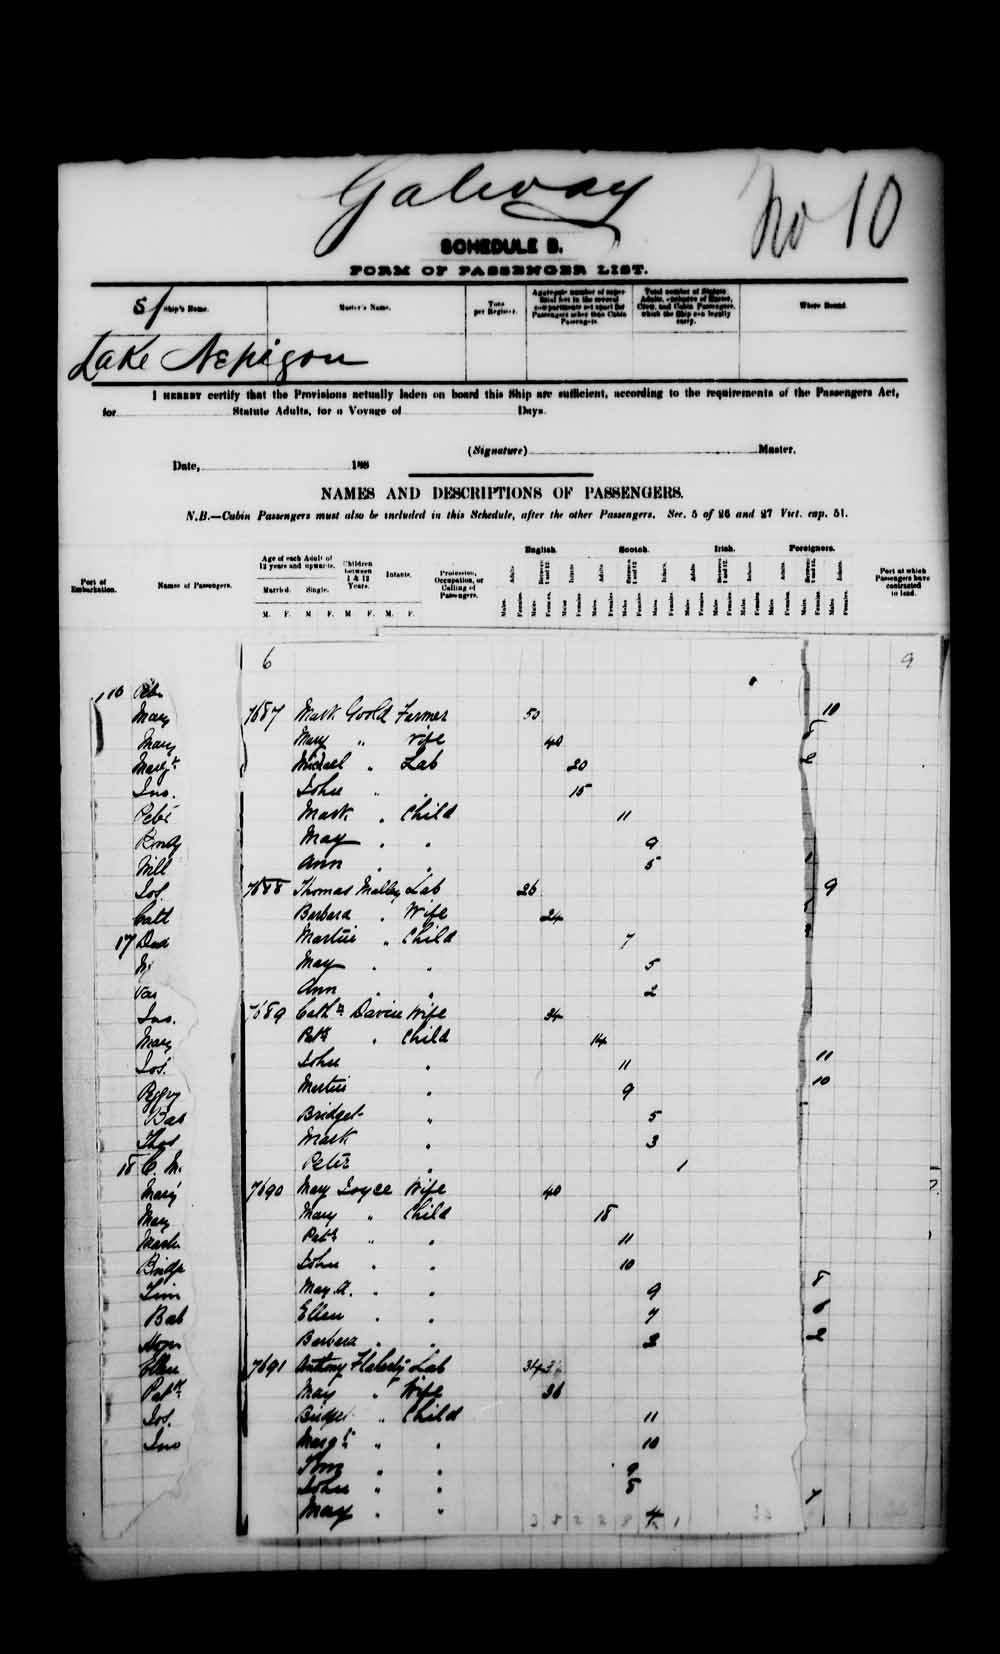 Digitized page of Passenger Lists for Image No.: e003541462